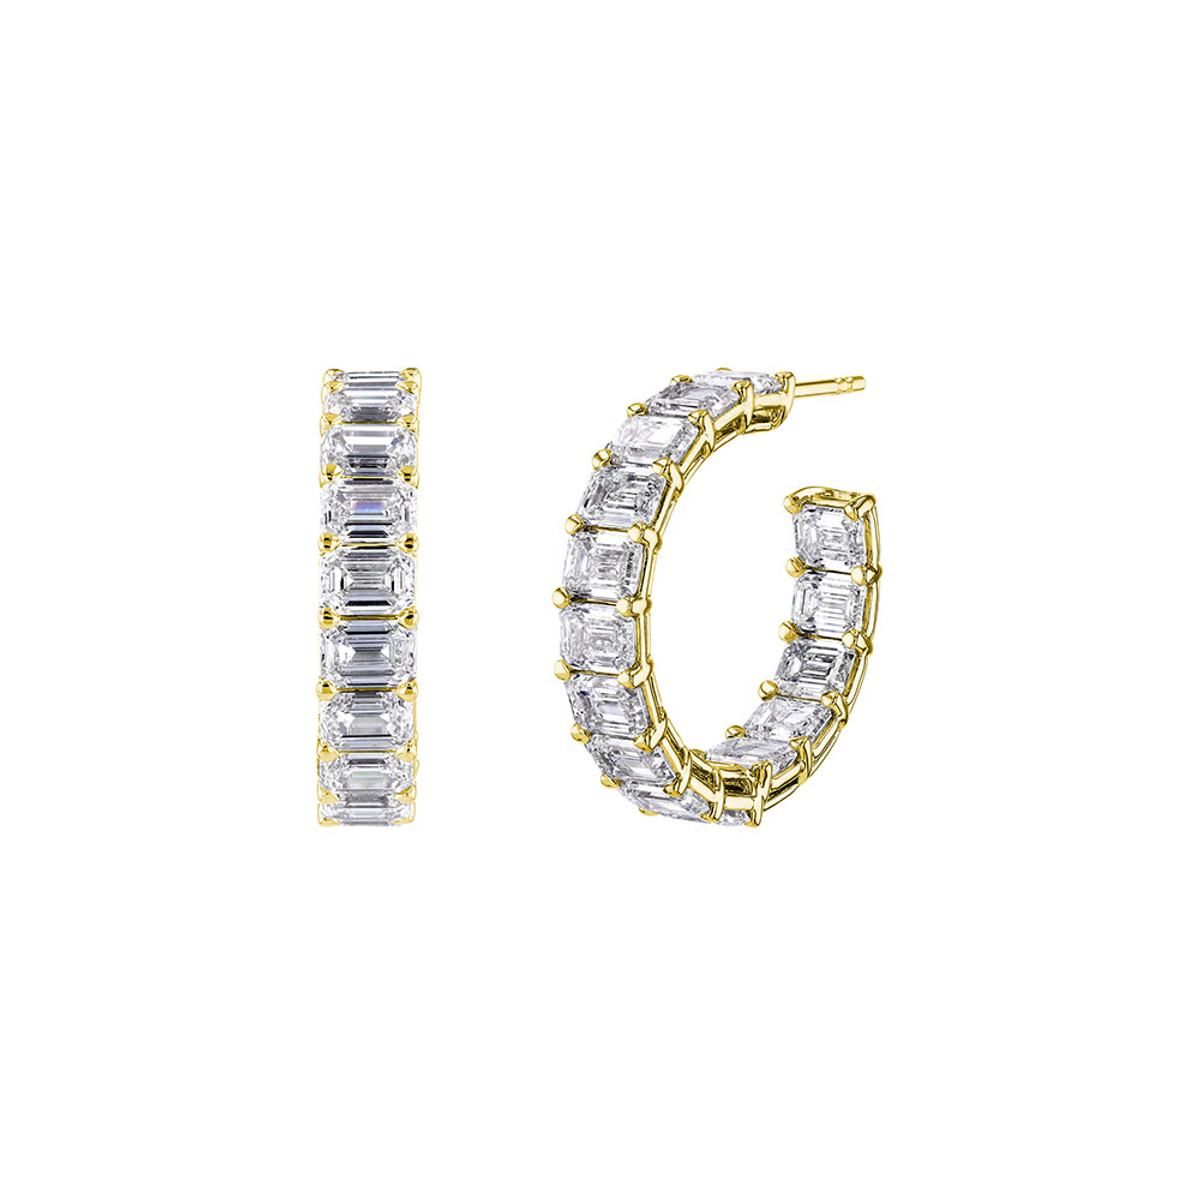 Hyde Park Collection 18K Yellow Gold Diamond Hoop Earrings-59194 Product Image